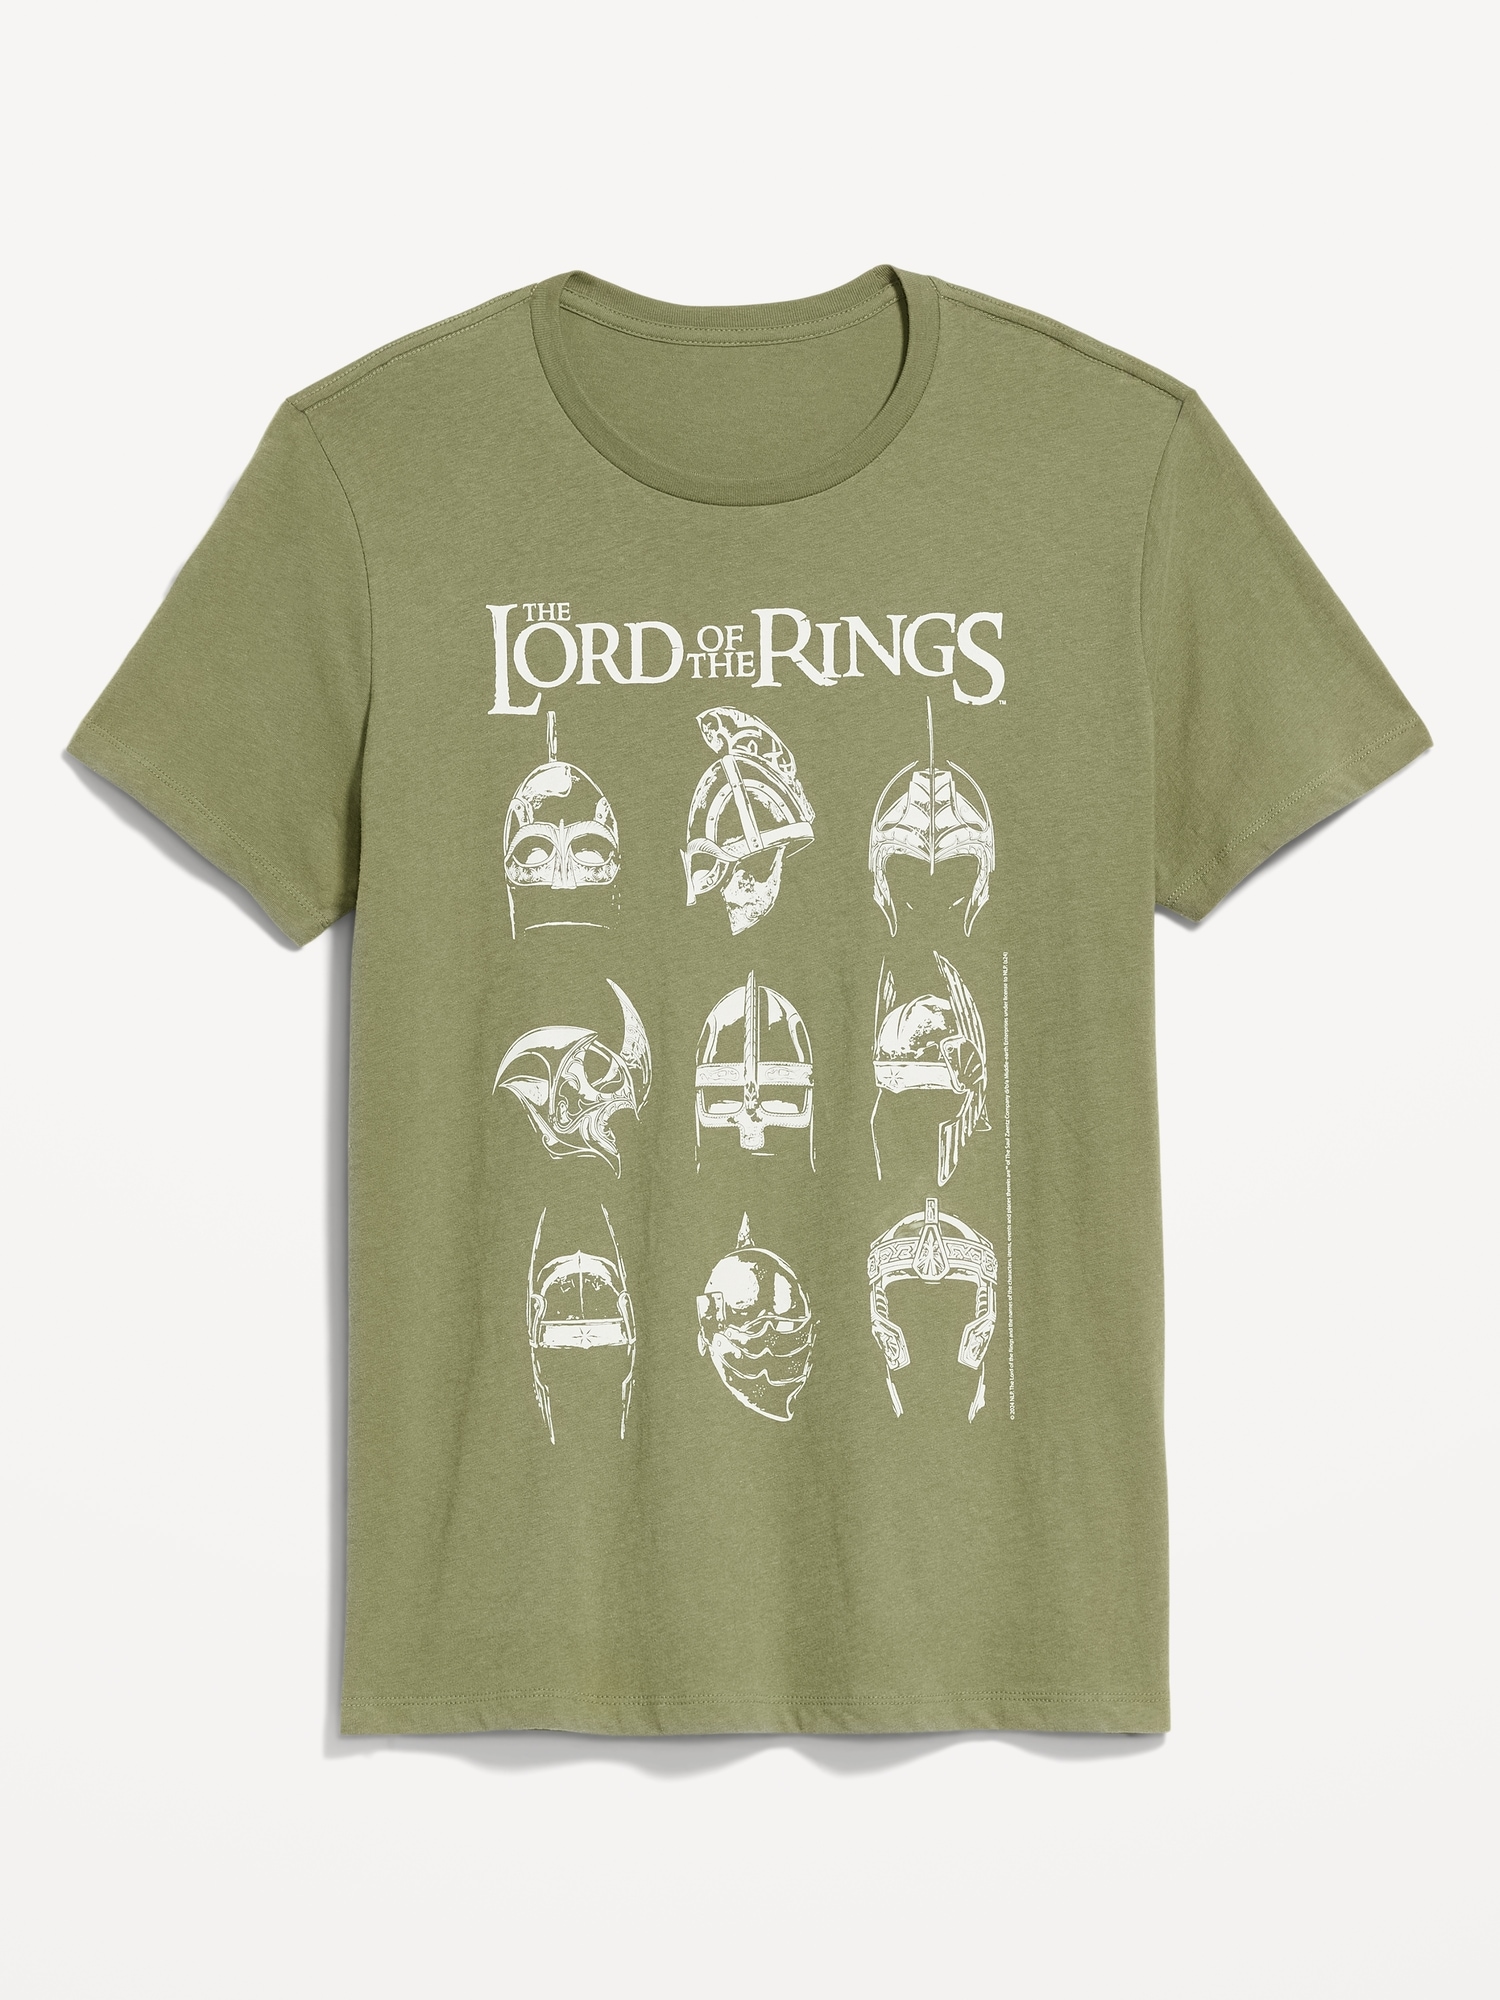 The Lord of the Rings T-Shirt